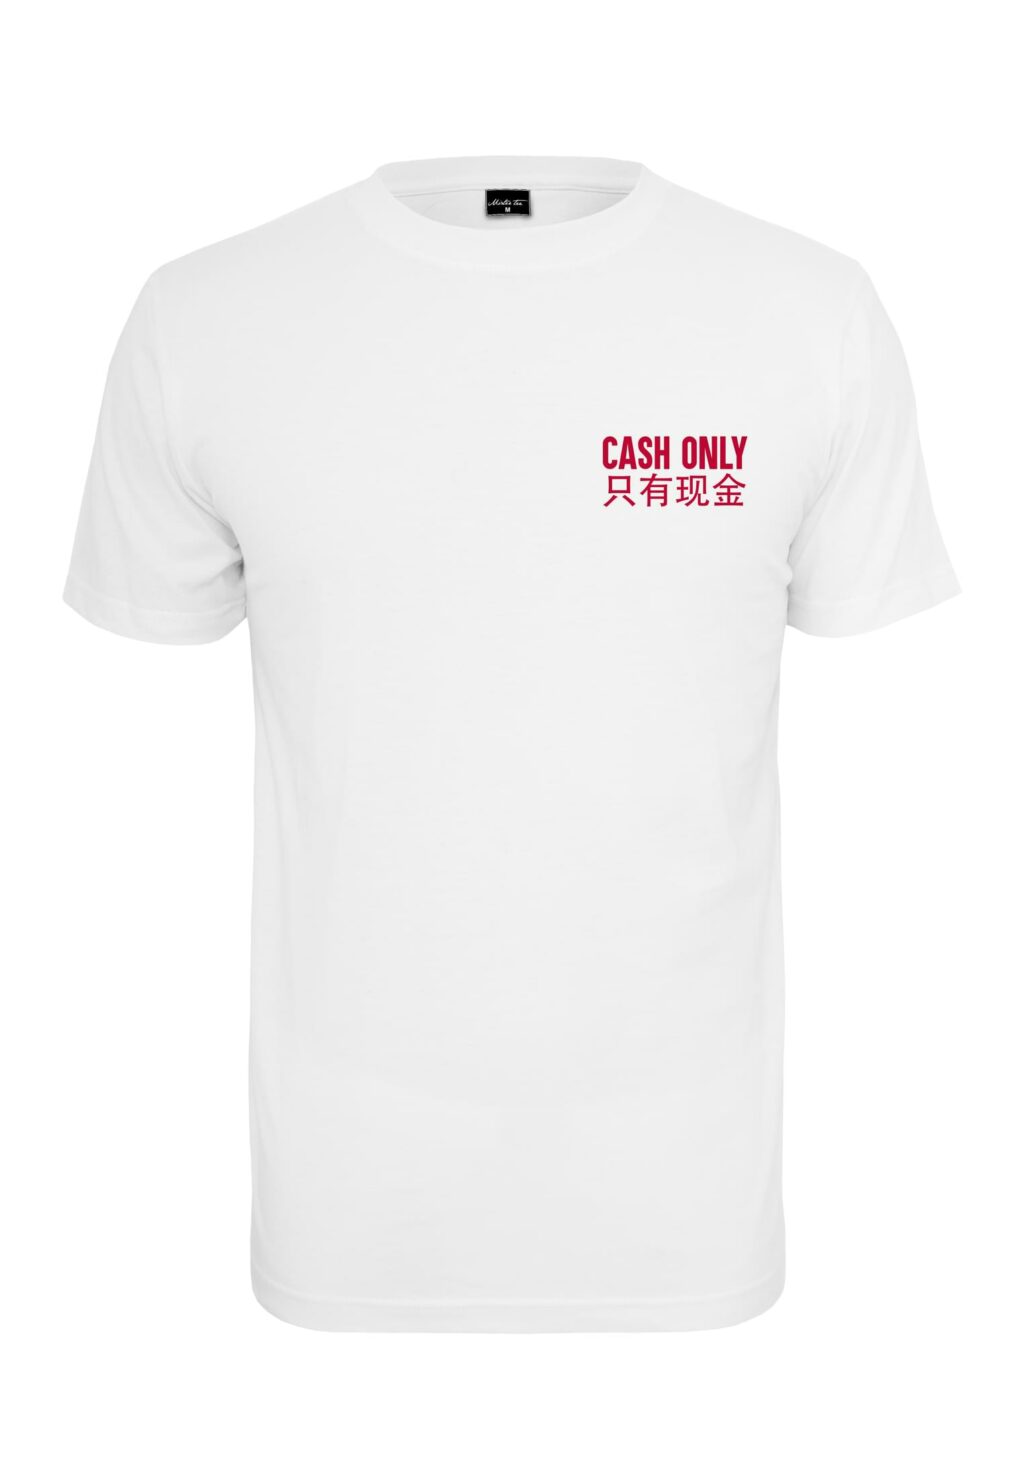 Cash Only Tee white MT816